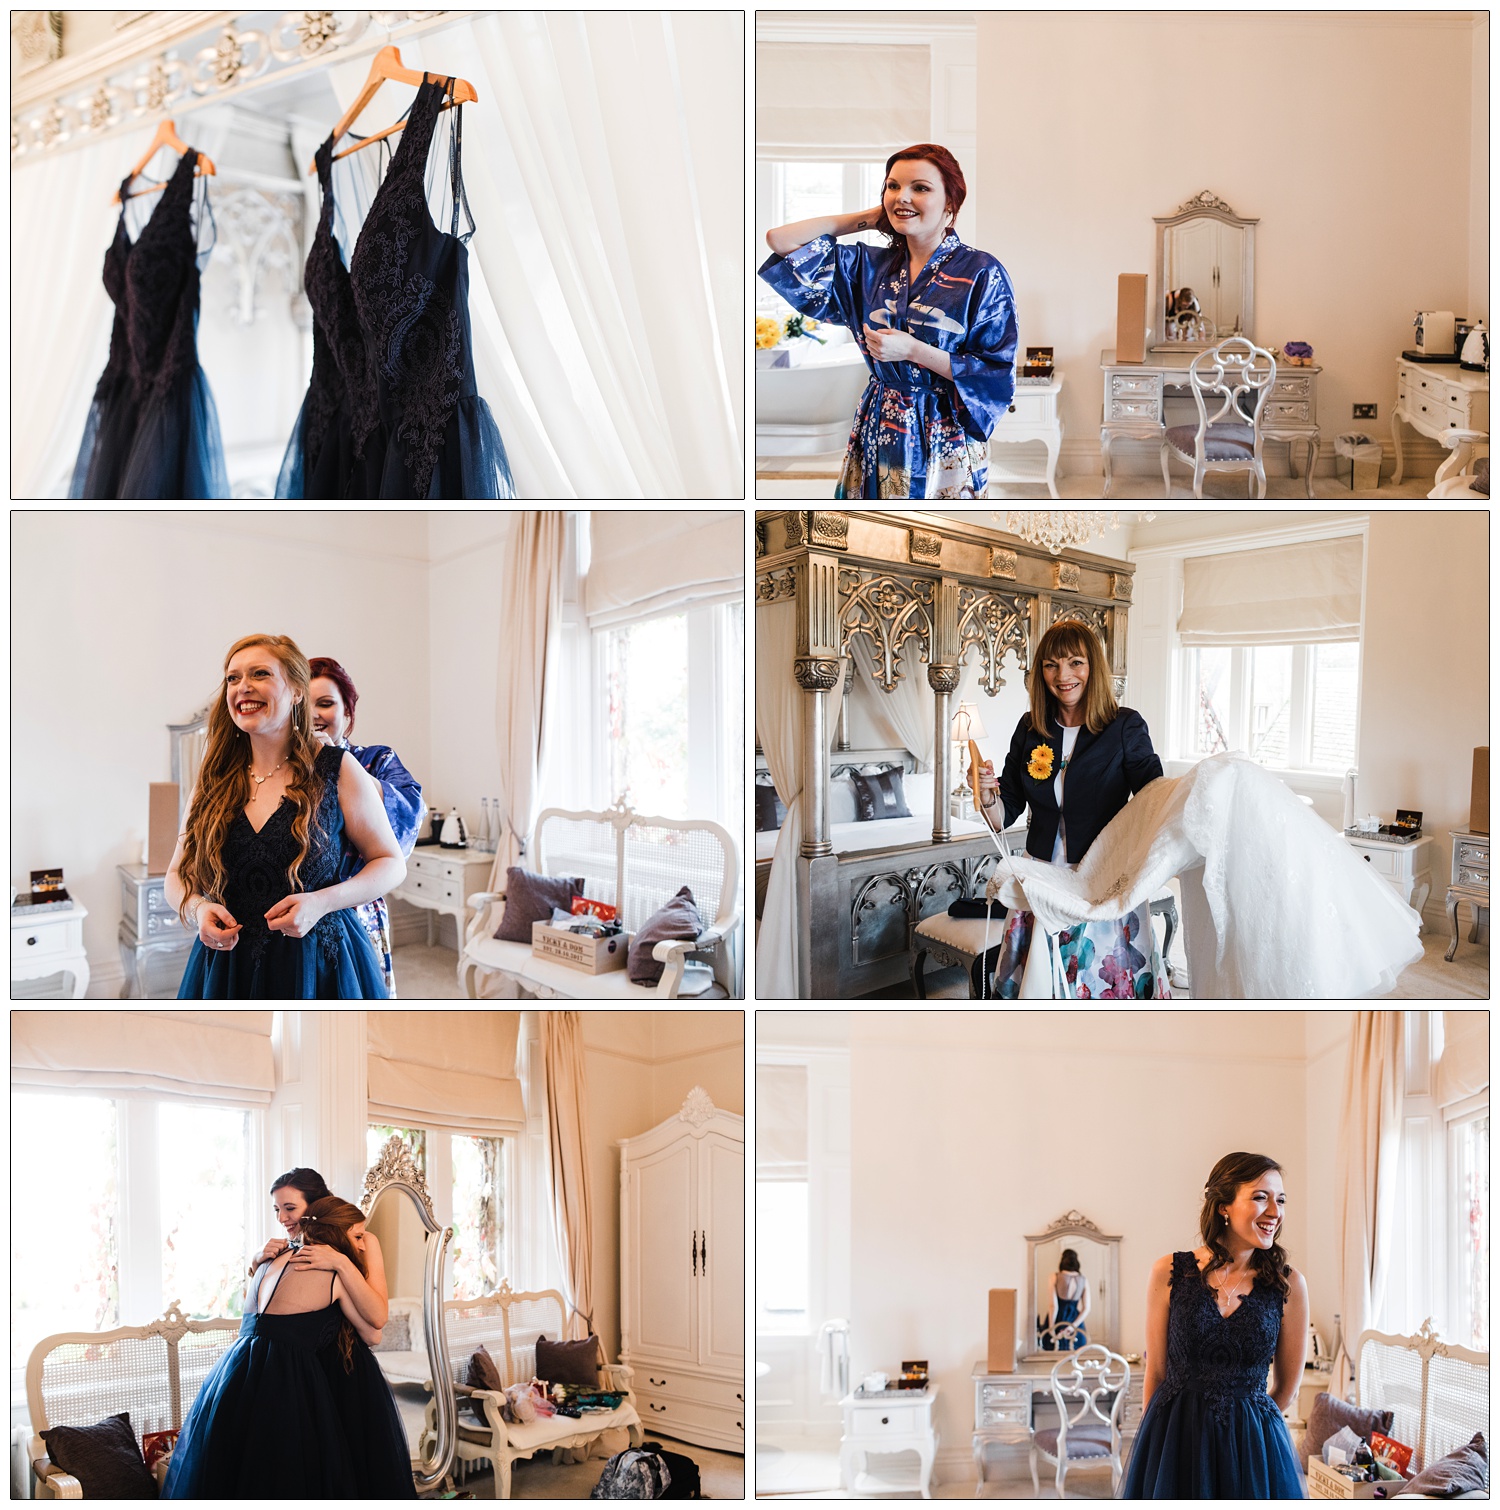 Bride and friends getting ready in the bedroom at Manor by the Lake. The dresses are navy blue and hanging from the ornate silver four poster bed.